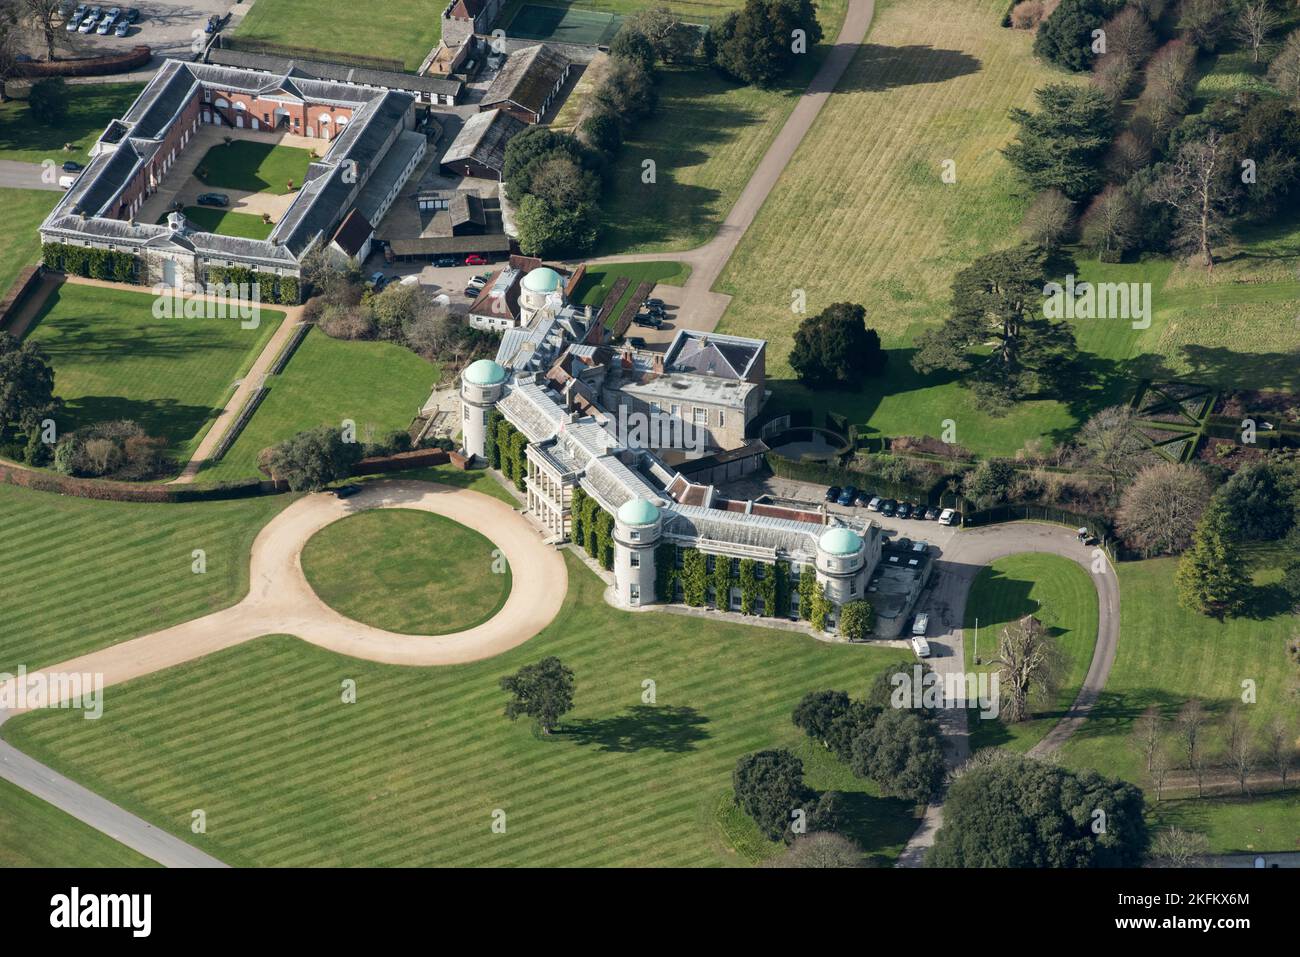 Goodwood House and stables, West Sussex, 2018. Stock Photo